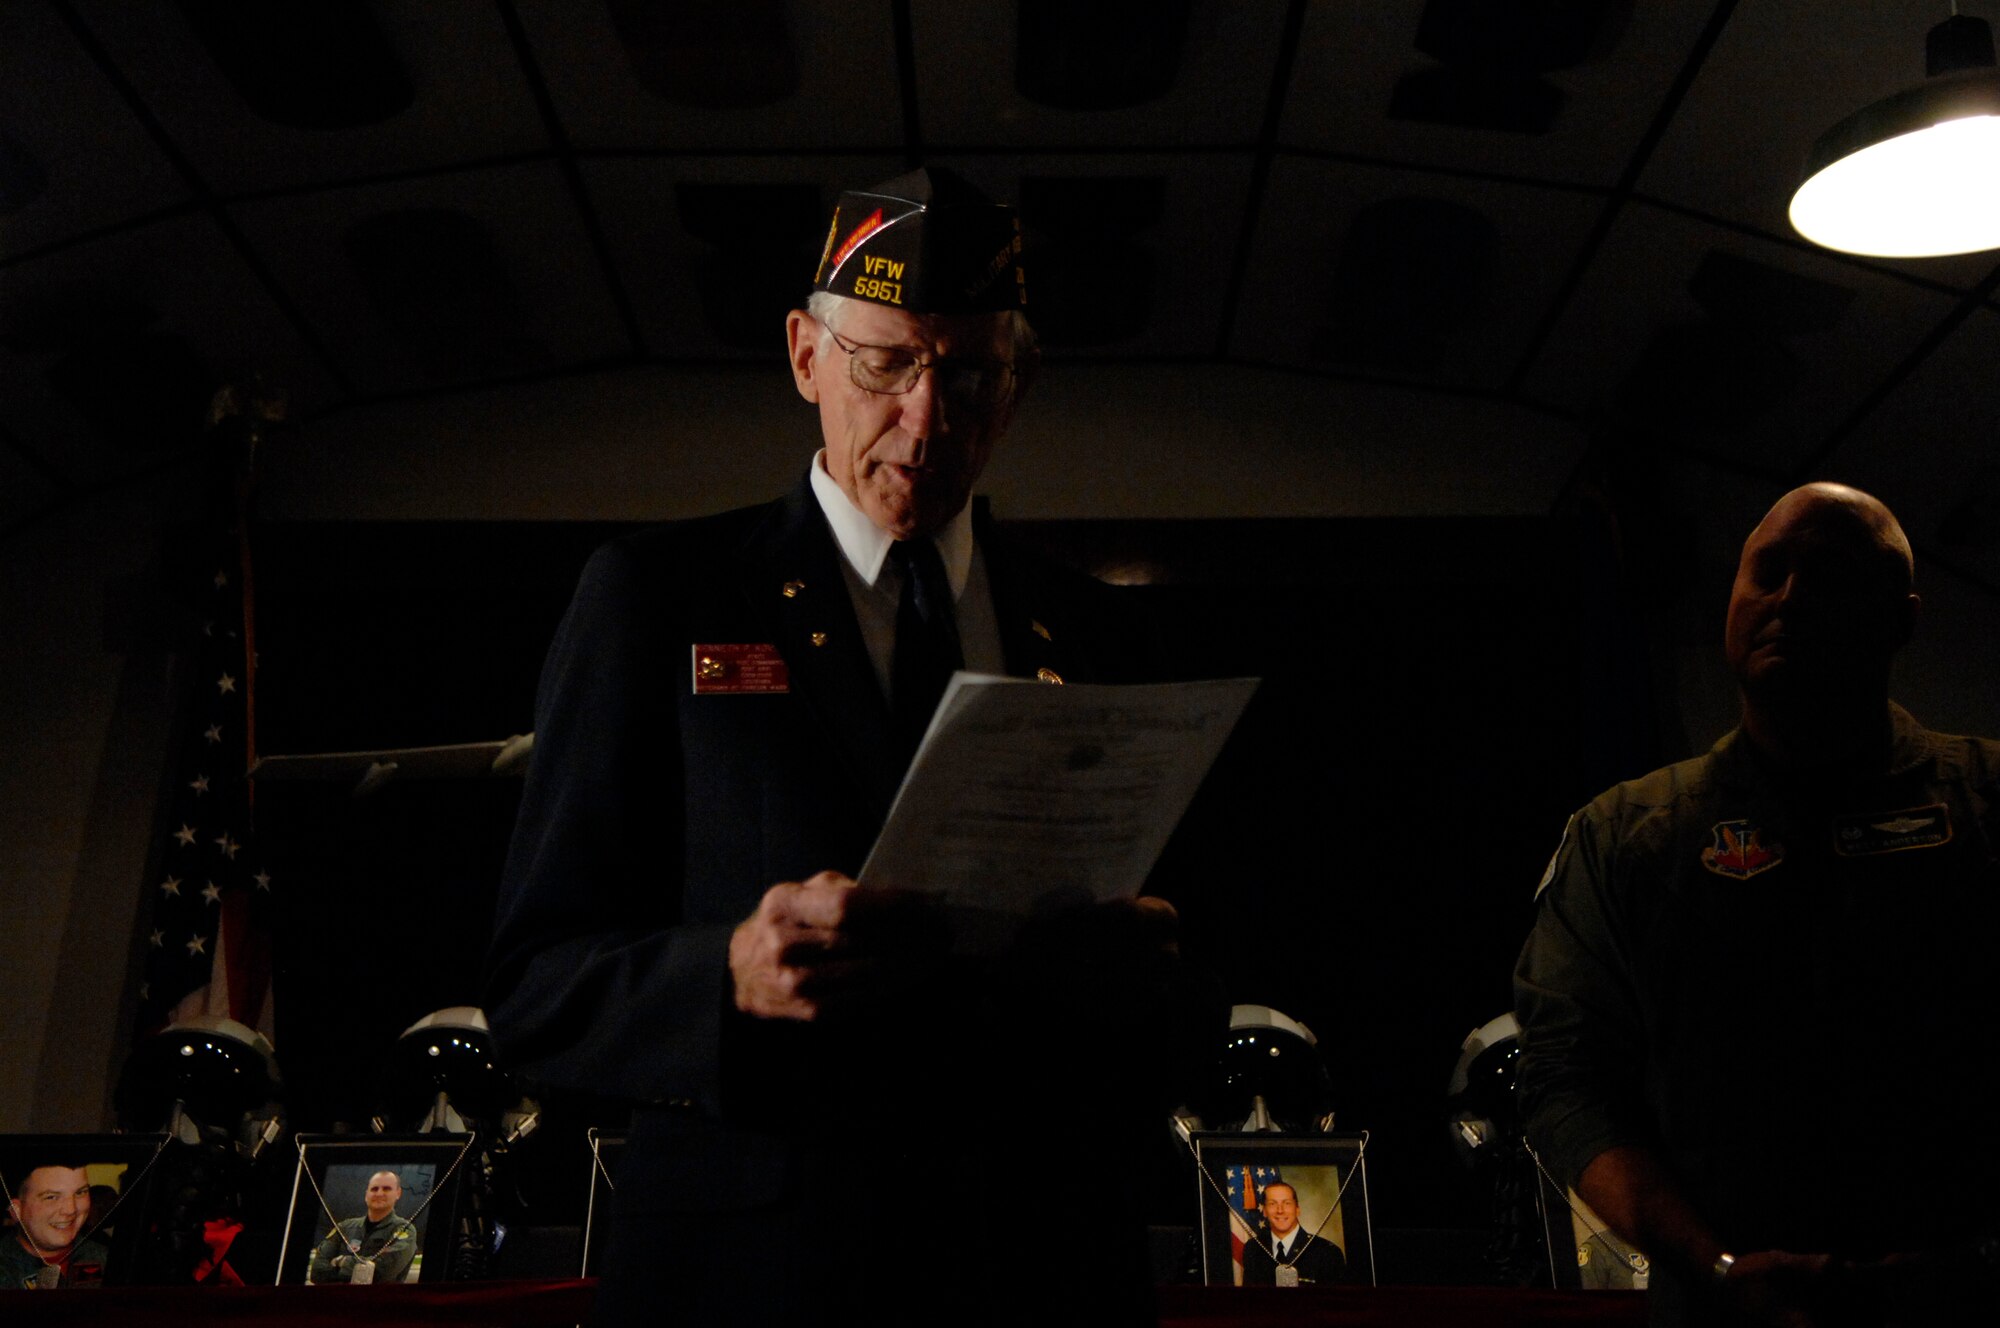 BARKSDALE AIR FORCE BASE, La. -- Kenneth Koval, Veterans of Foreign Wars member, reads a dedication to the crew members of Raider 21 during a presentation at the Eighth Air Force Museum here Aug. 12. (U.S. Air Force photo by Airman 1st Class Joanna M. Kresge)